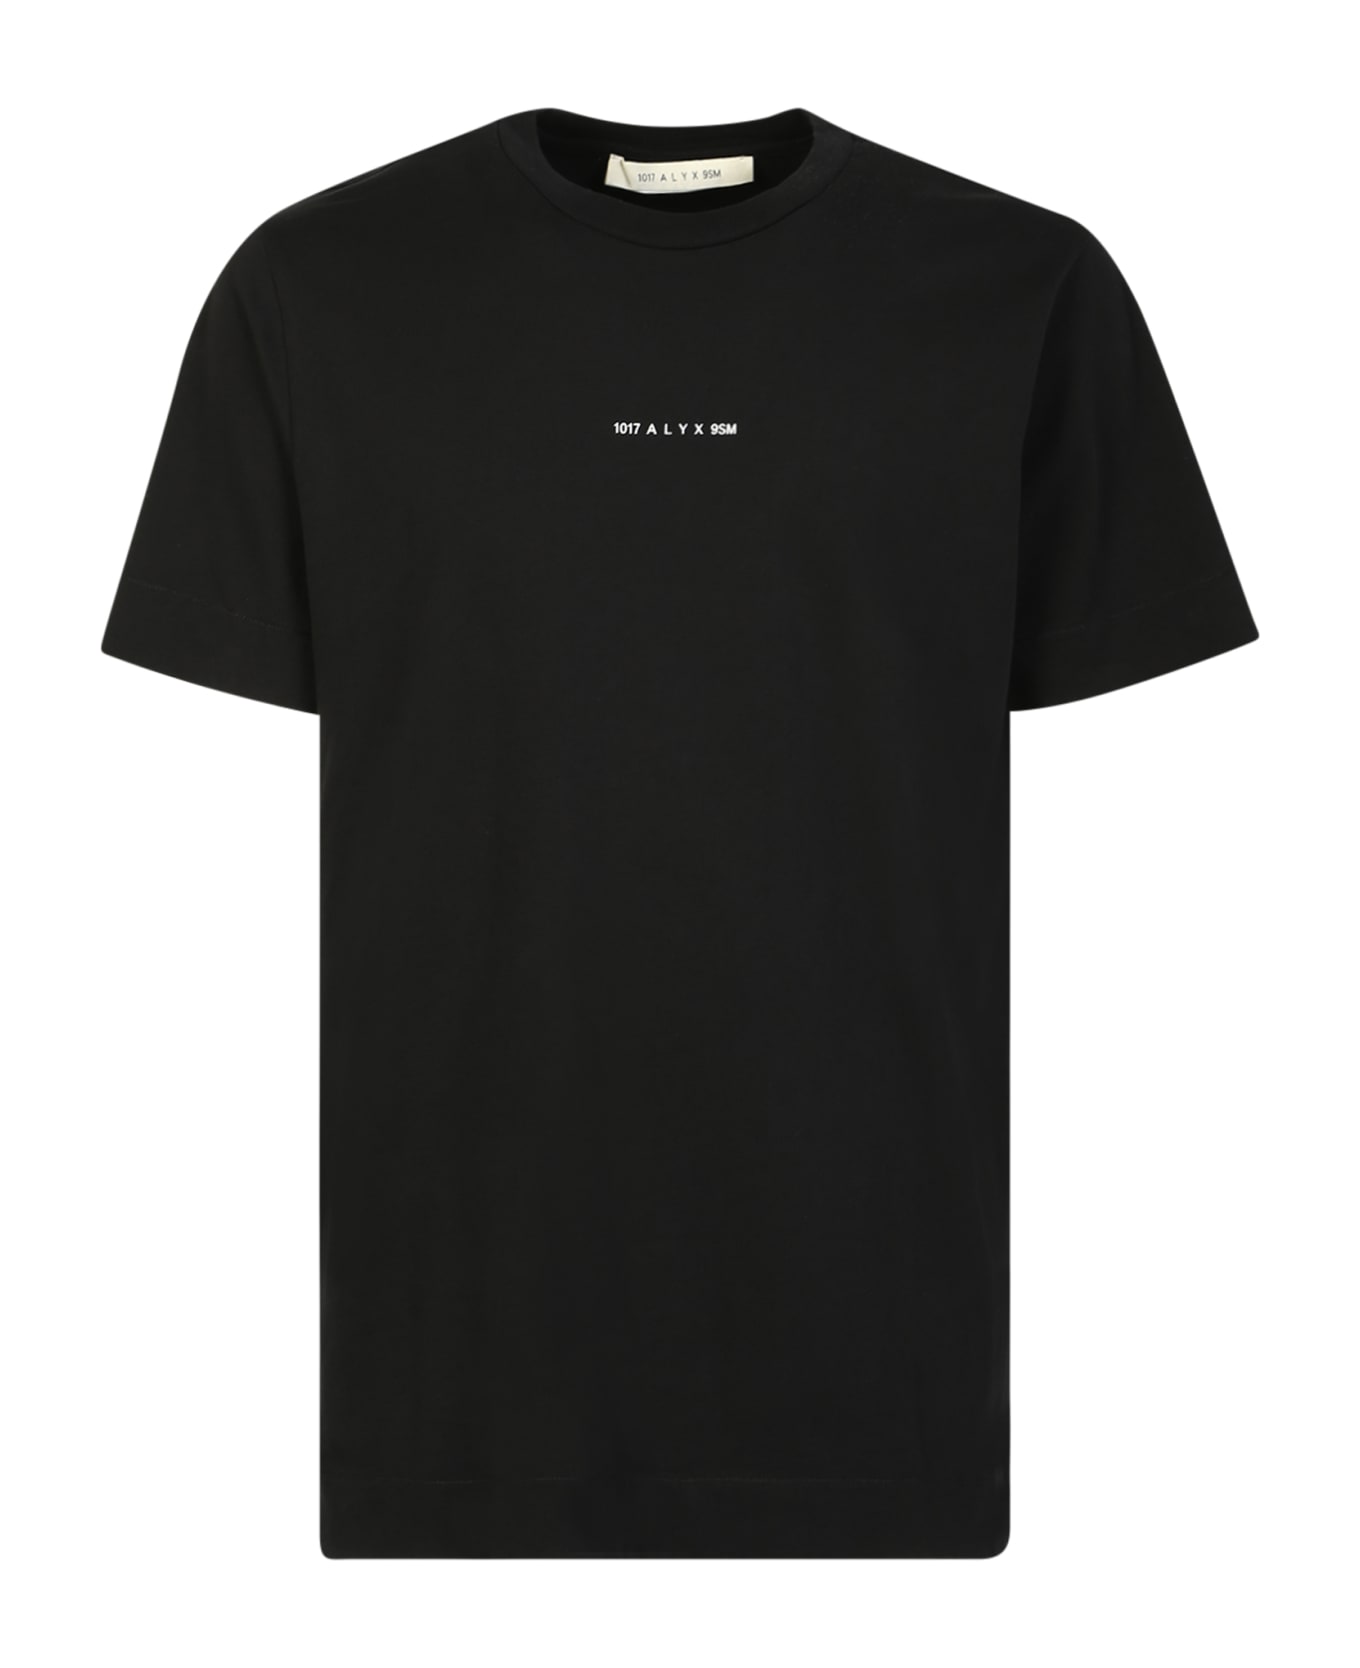 1017 ALYX 9SM Fitted T-shirt - Black